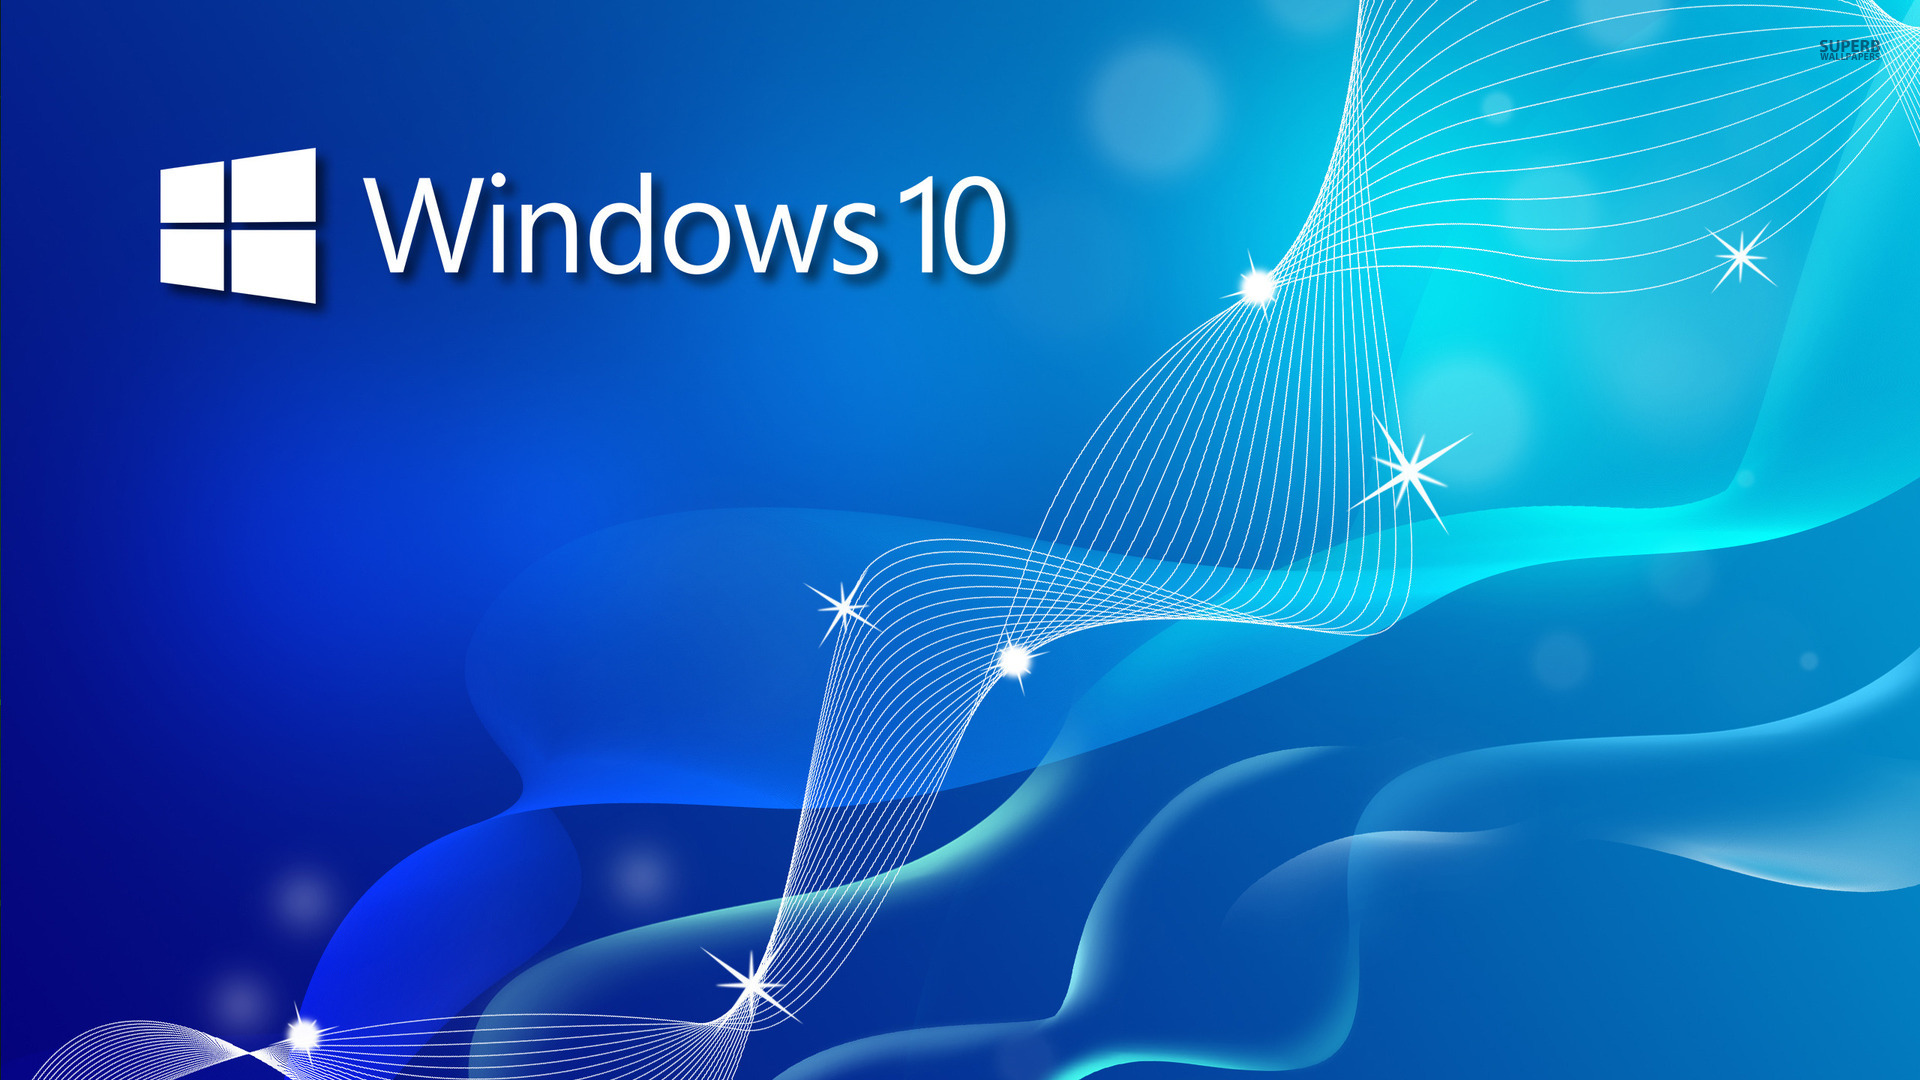 Windows Wallpaper Full HD Pictures